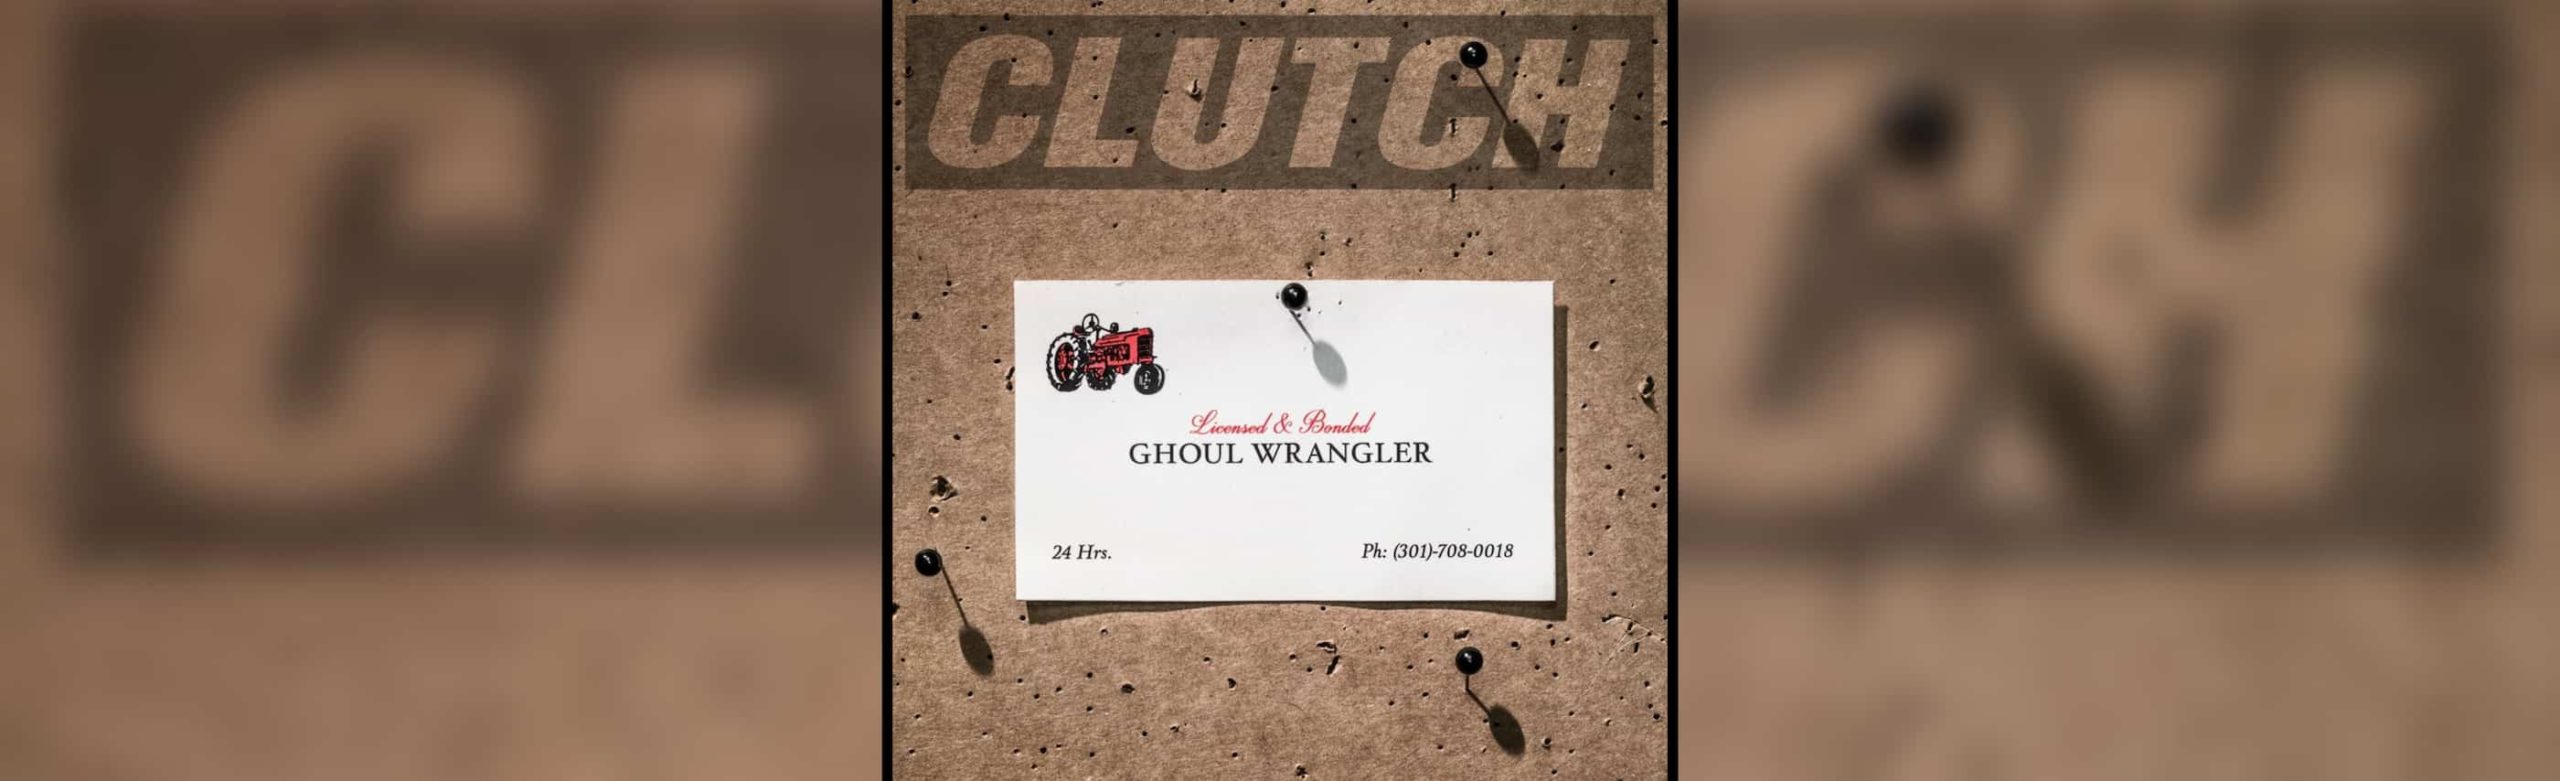 Clutch Releases “Ghoul Wrangler” Music Video Image